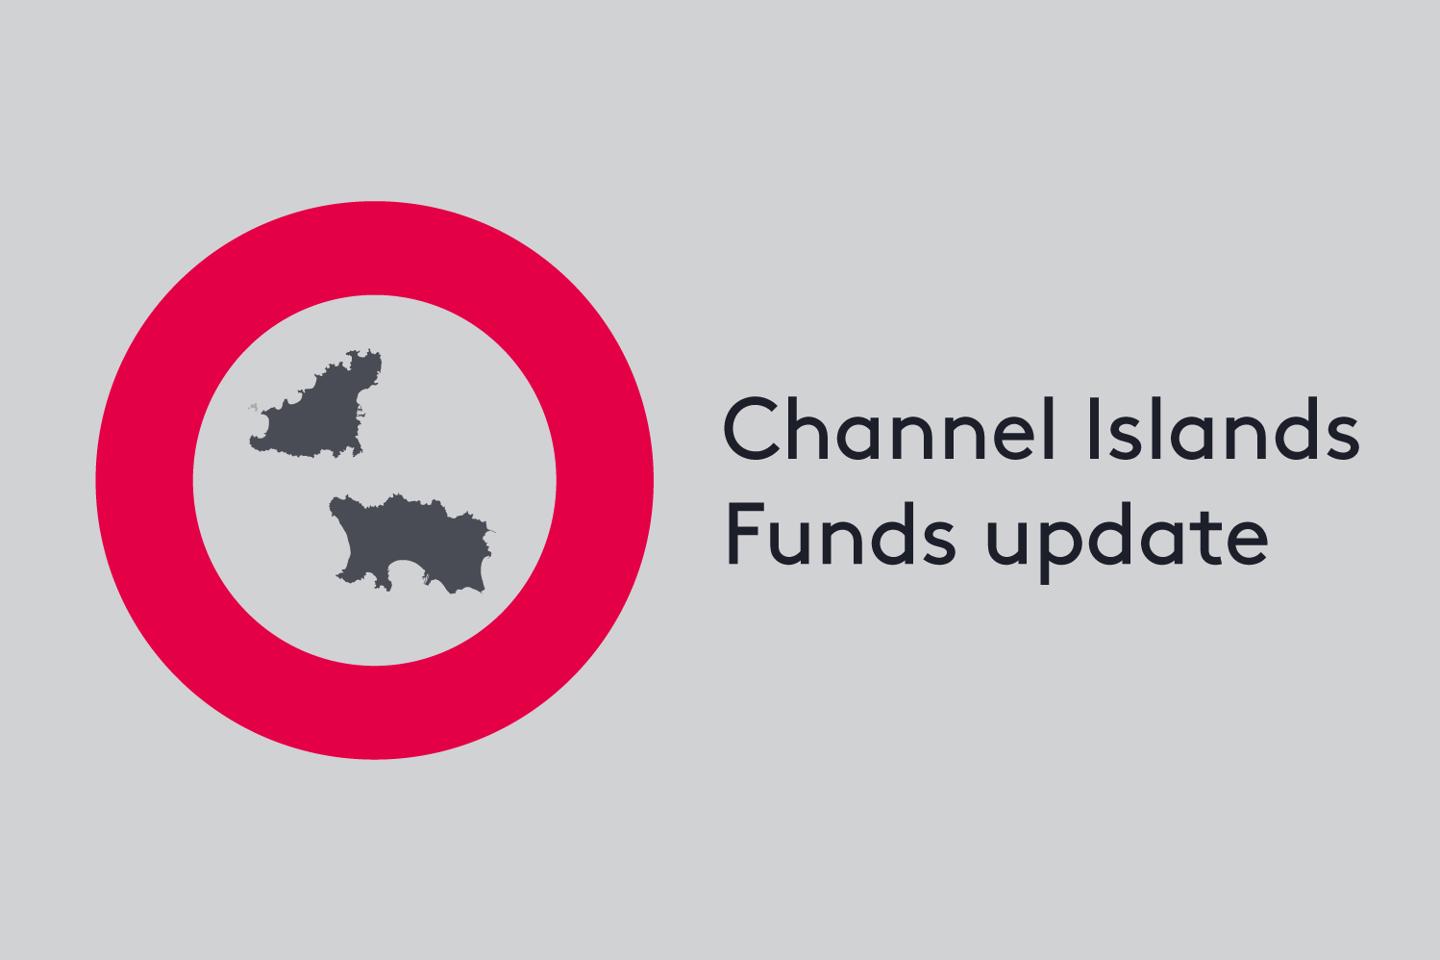 Channel Islands Funds Update